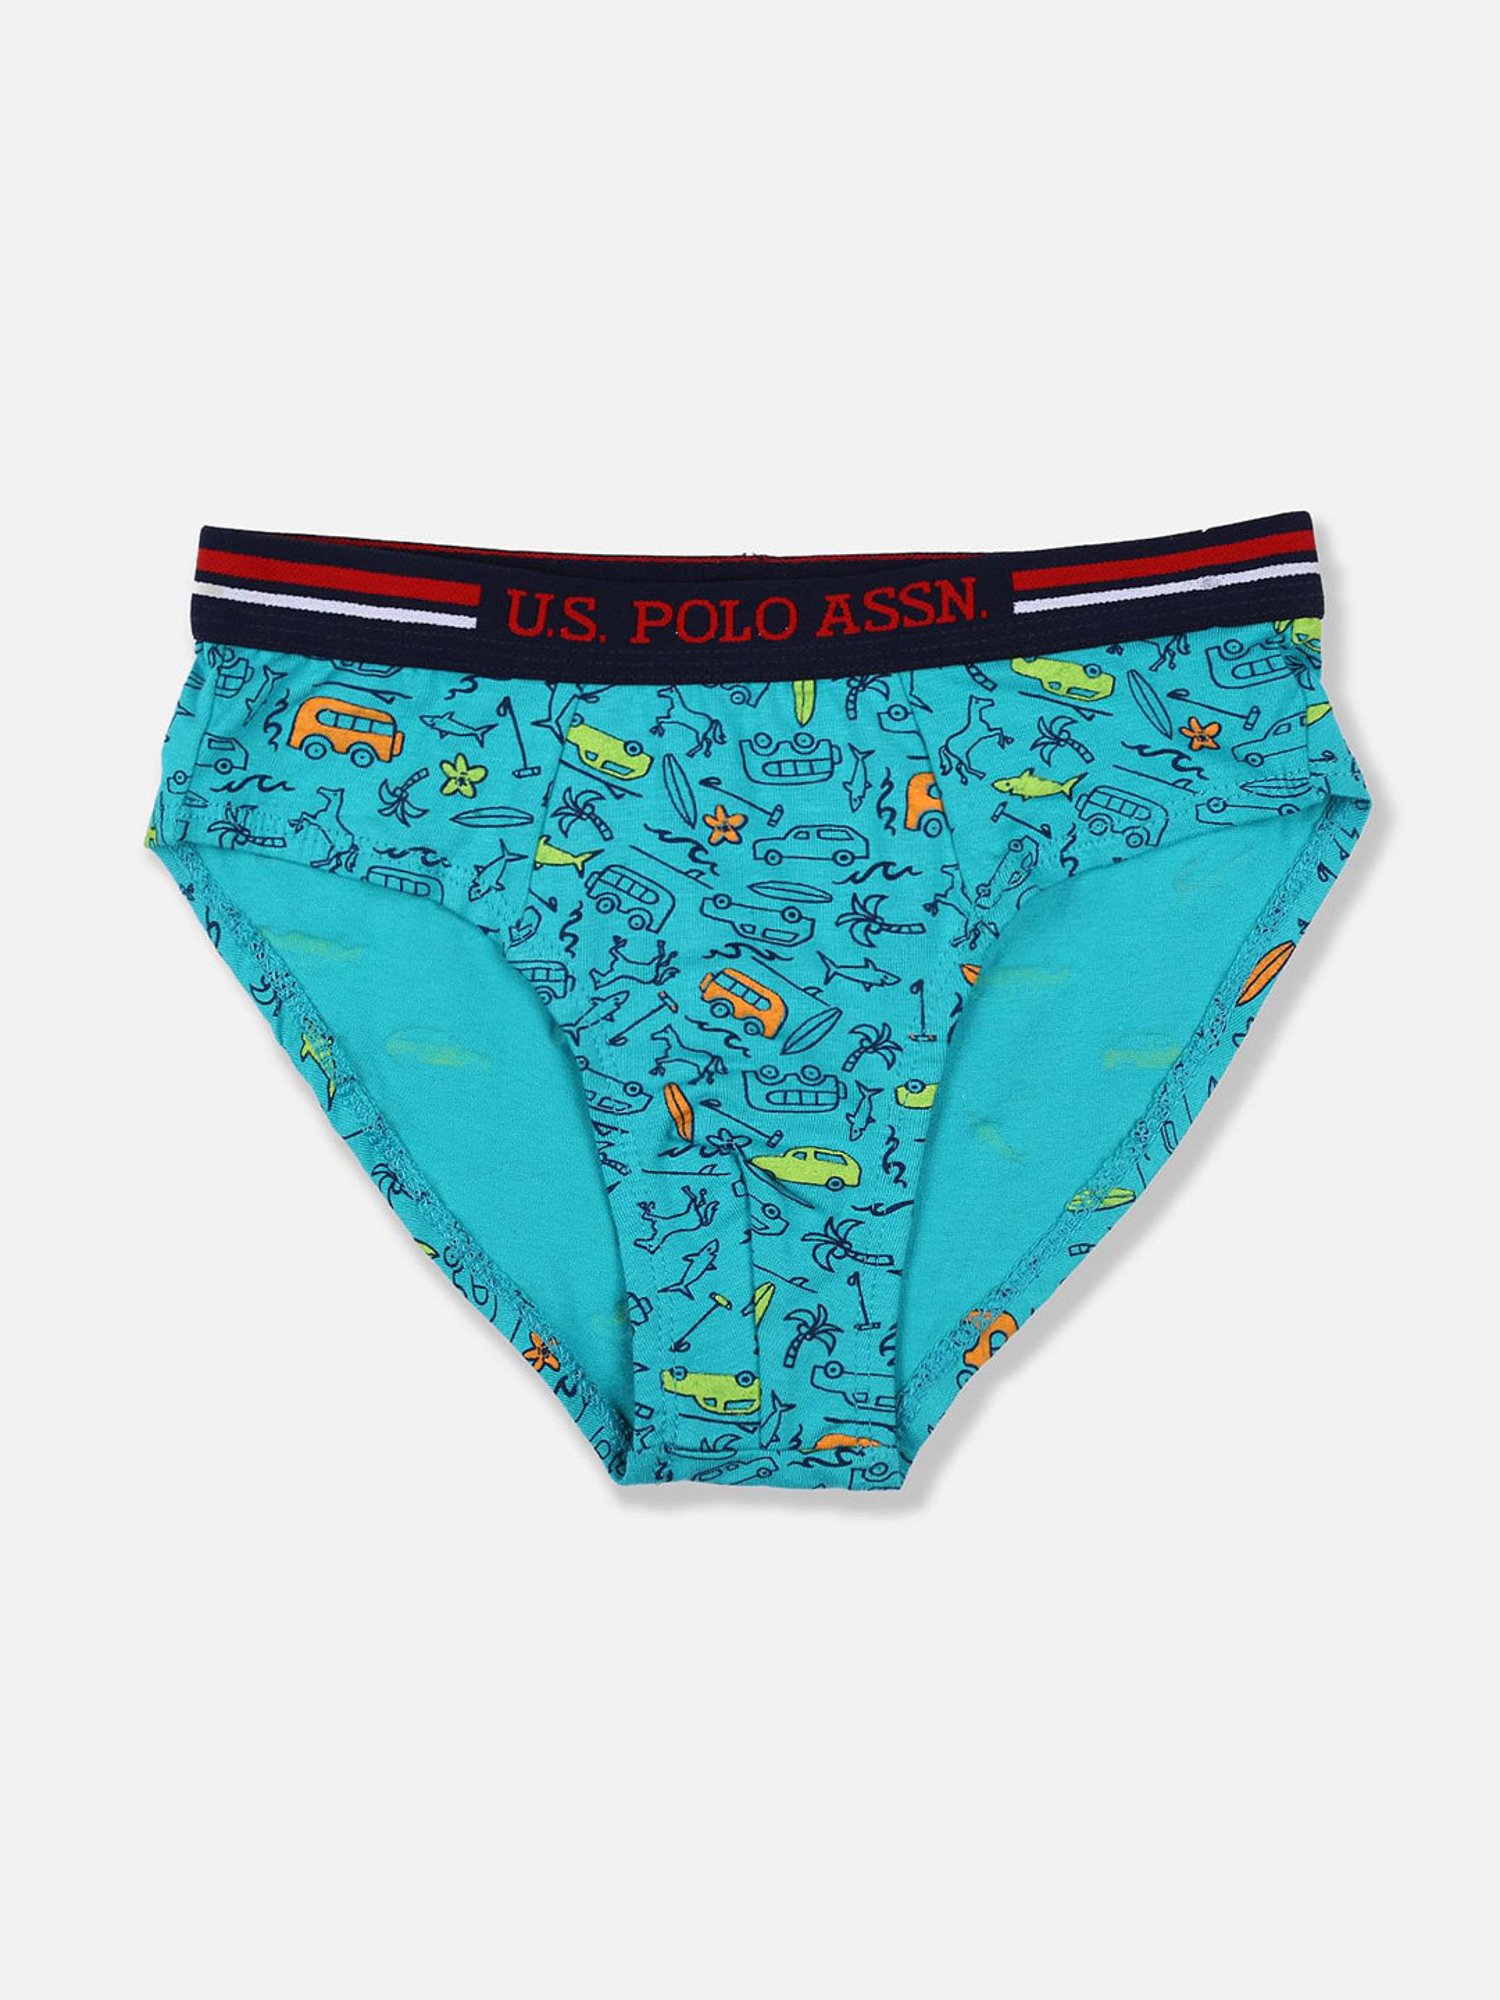 U.S. Polo Assn. Kids Assorted Printed Briefs (Pack Of 3)